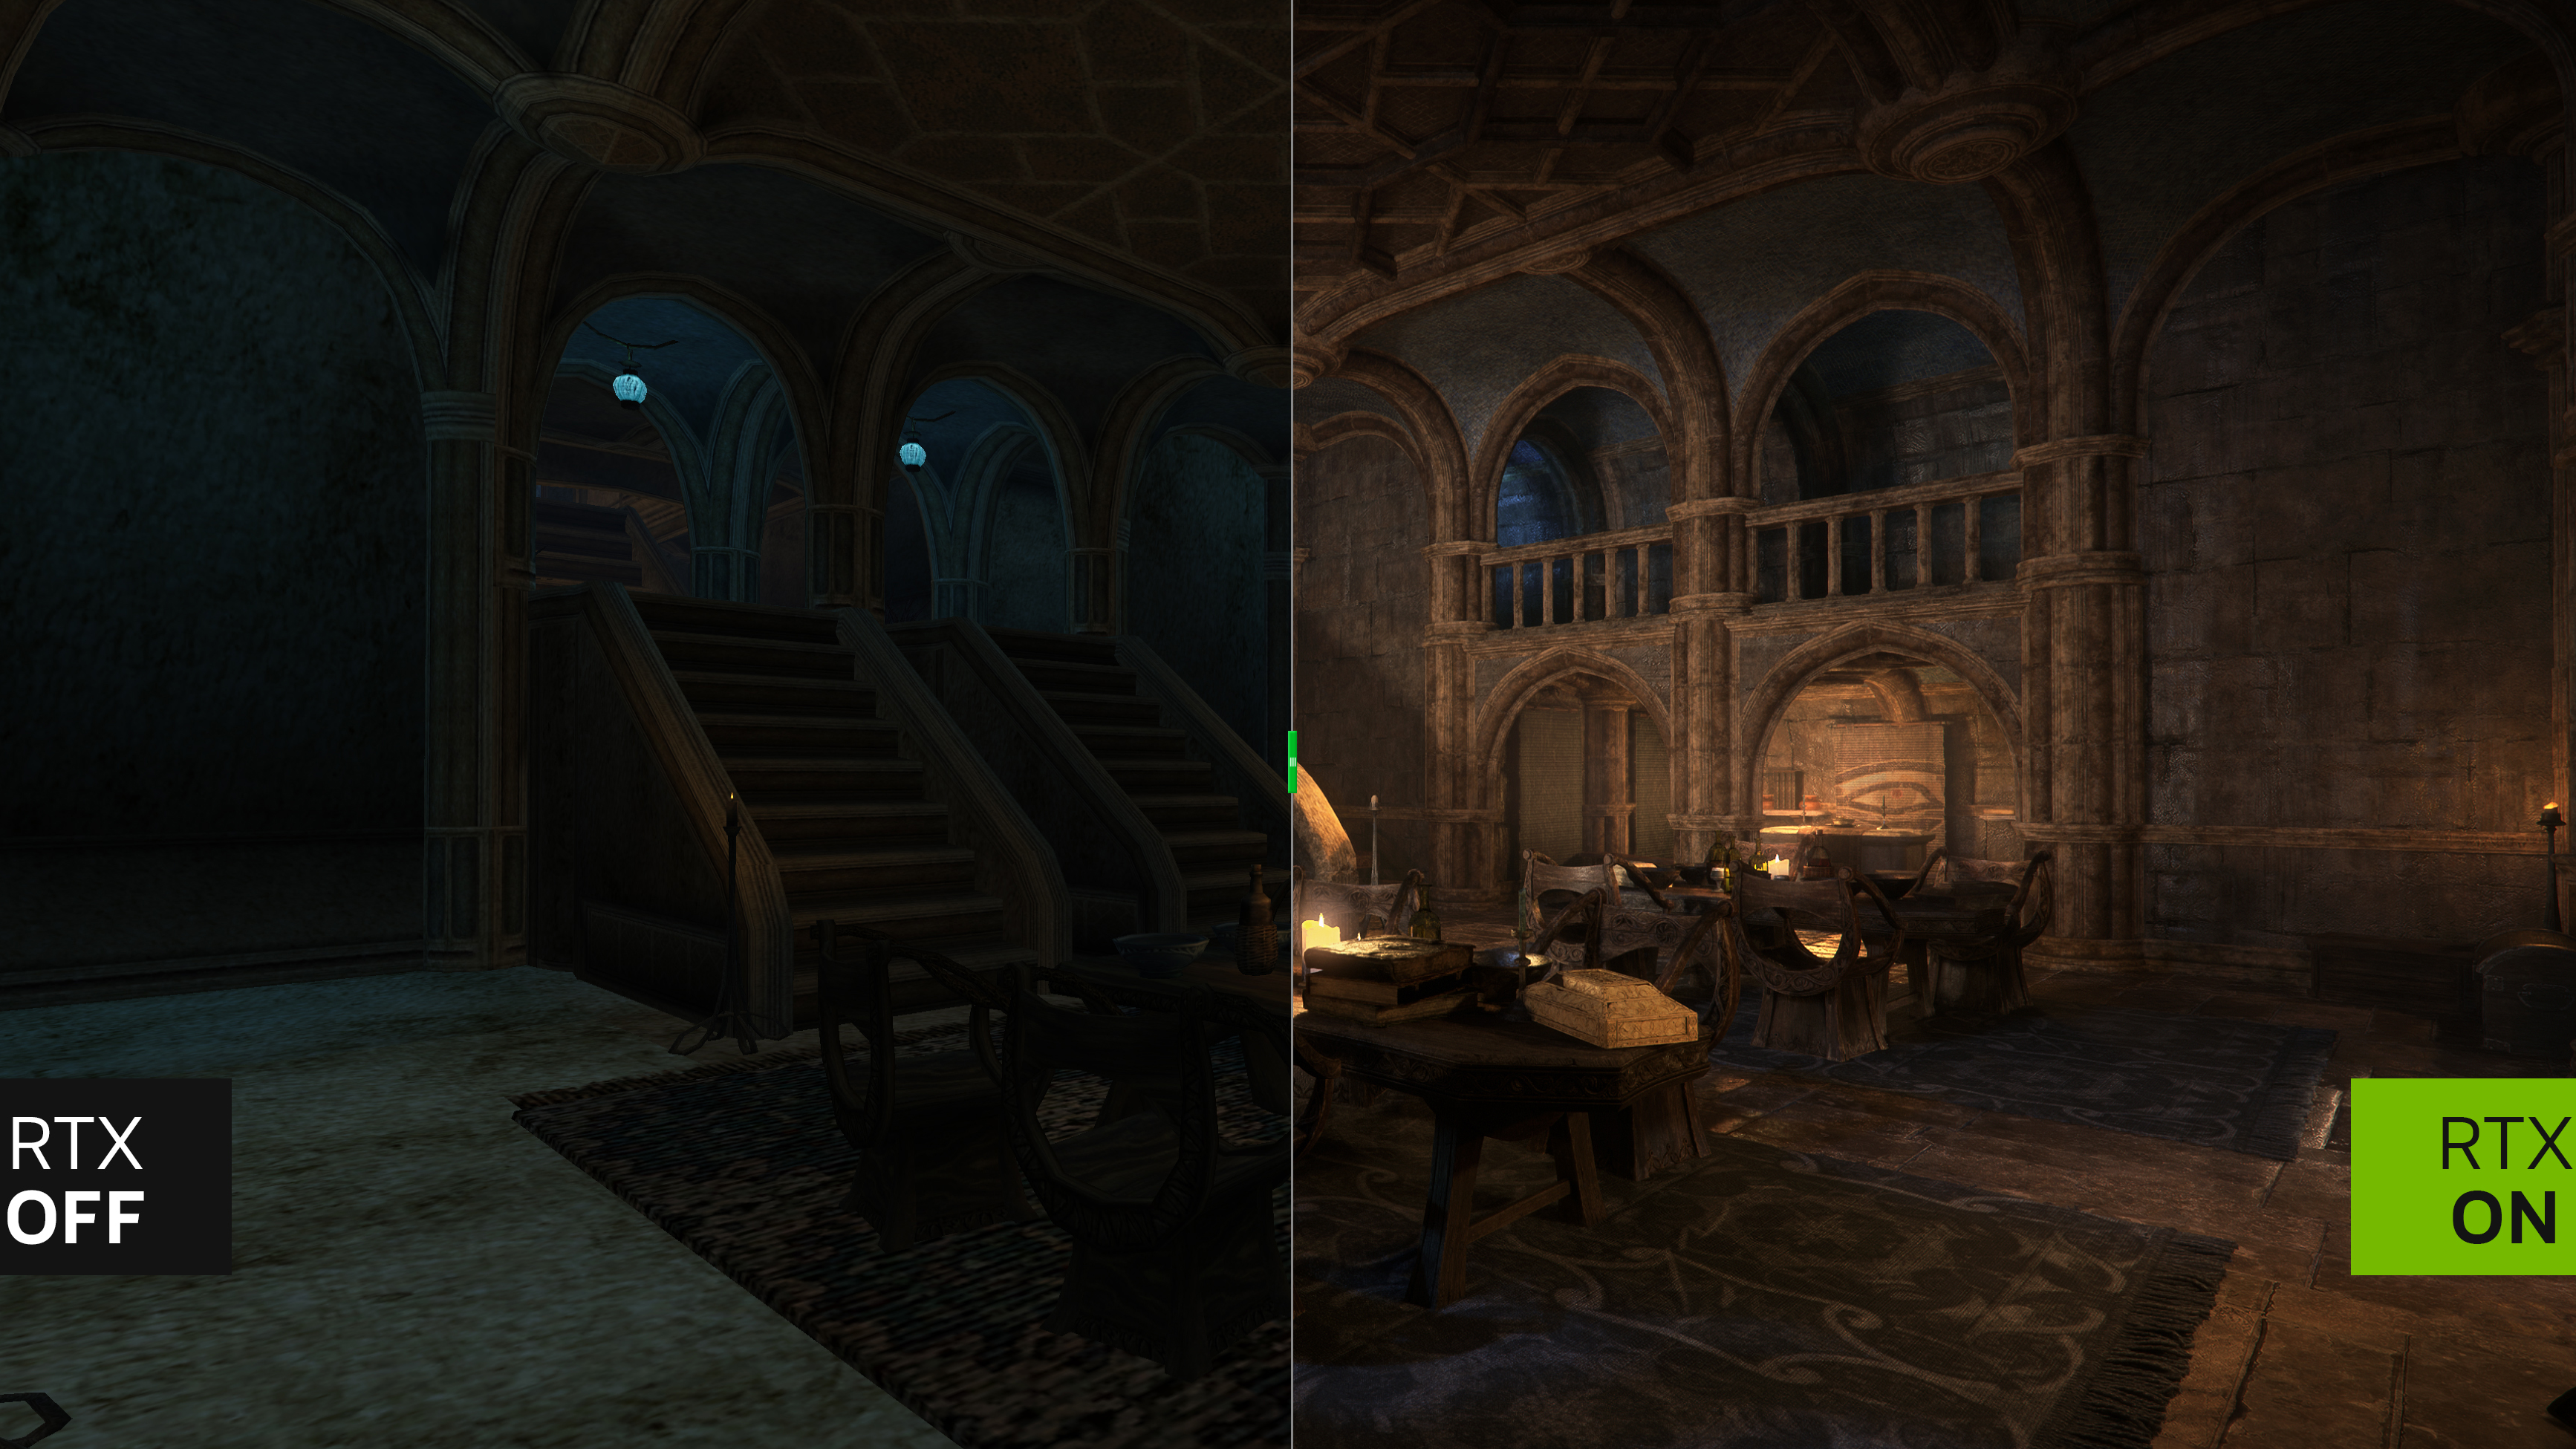 Comparison shot of a building interior in The Elder Scrolls: Morrowind, with 'RTX off' on the right hand side and 'RTX on' on the left.